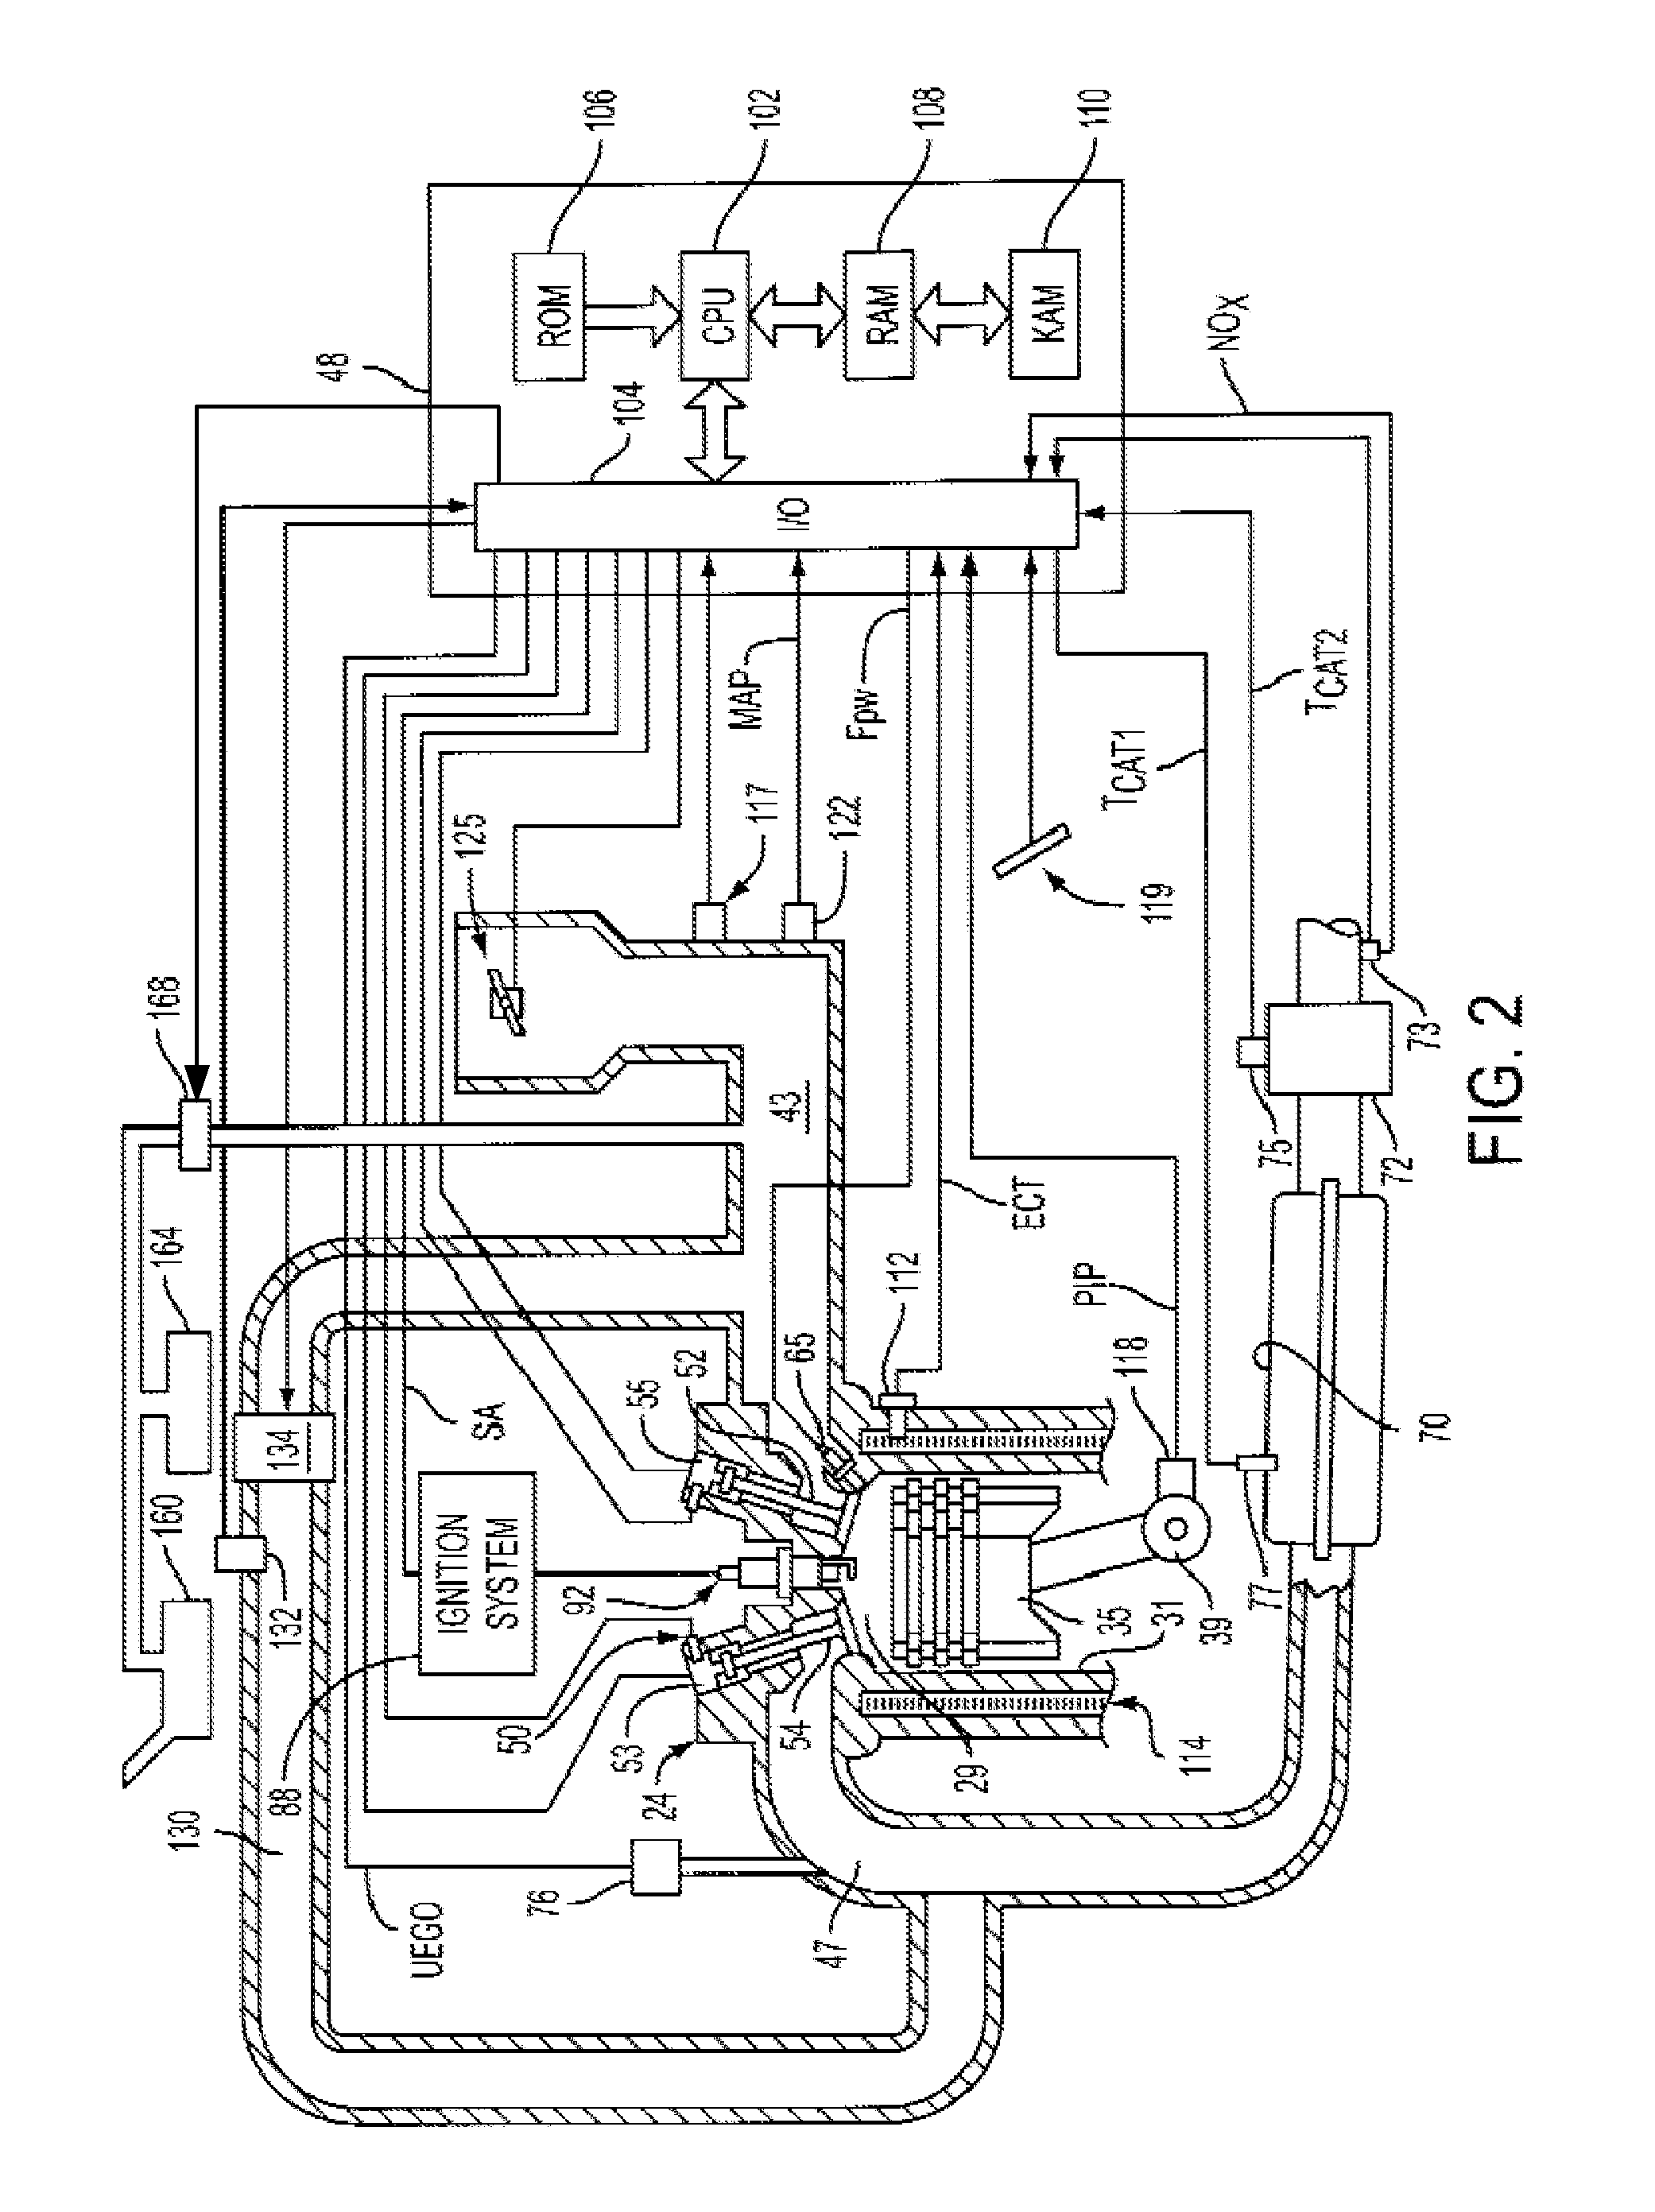 Hybrid Vehicle with Camless Valve Control